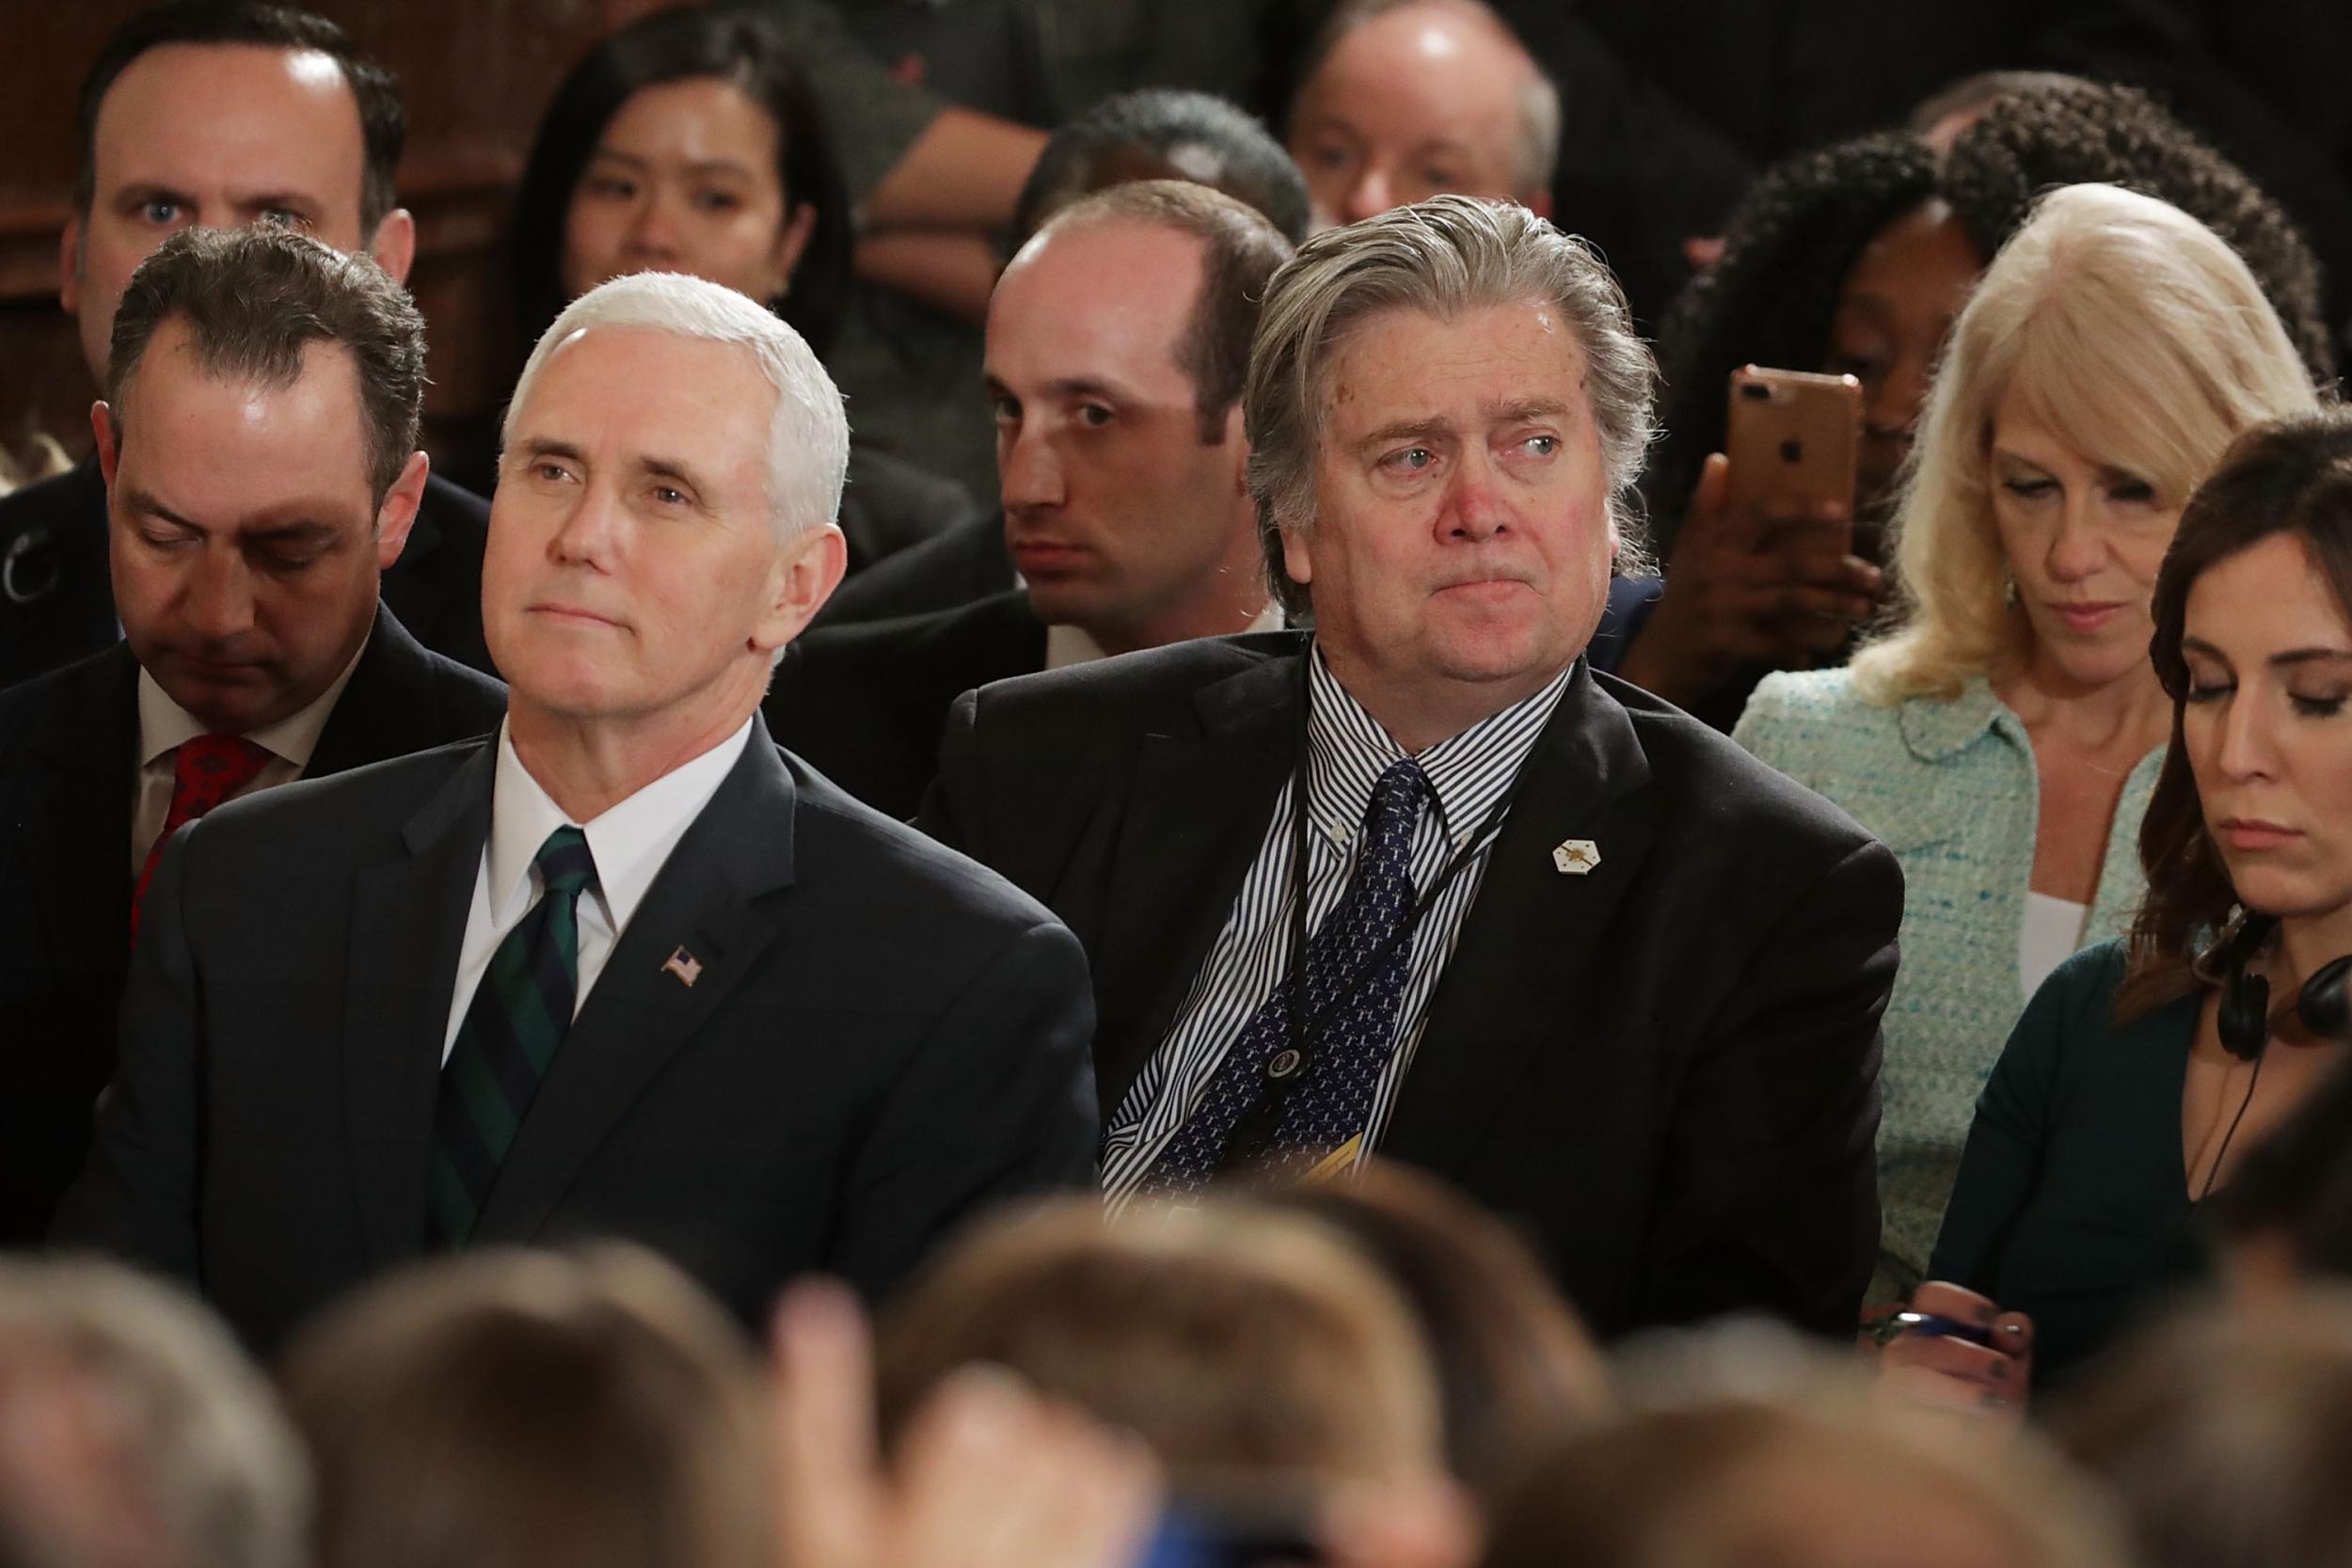 Vice President Mike Pence and former presidential adviser Steve Bannon are seen in the White House ahead of a press conference